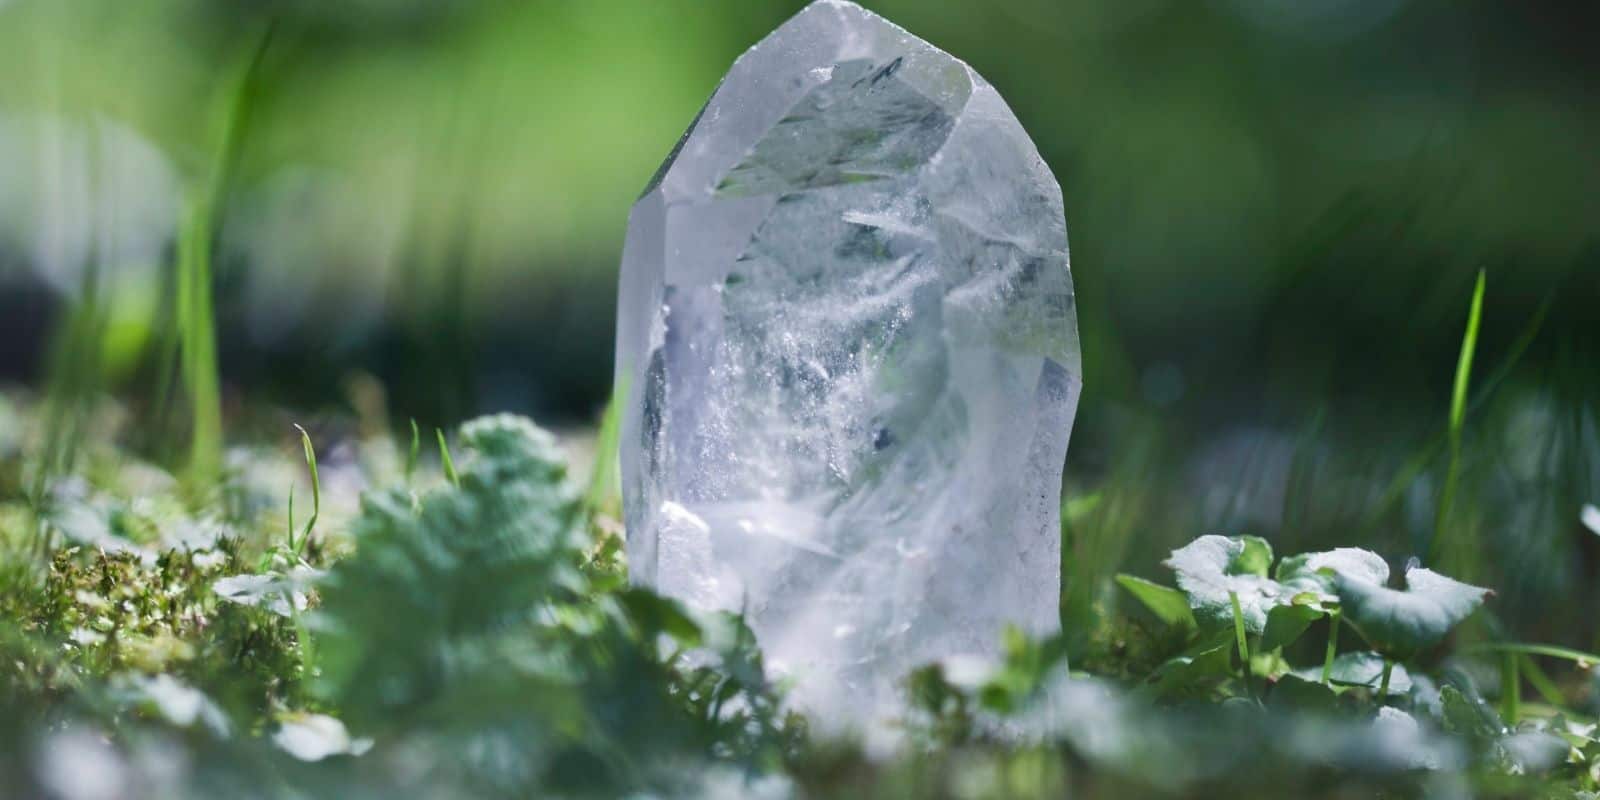 Crystal quartz meaning and healing properties